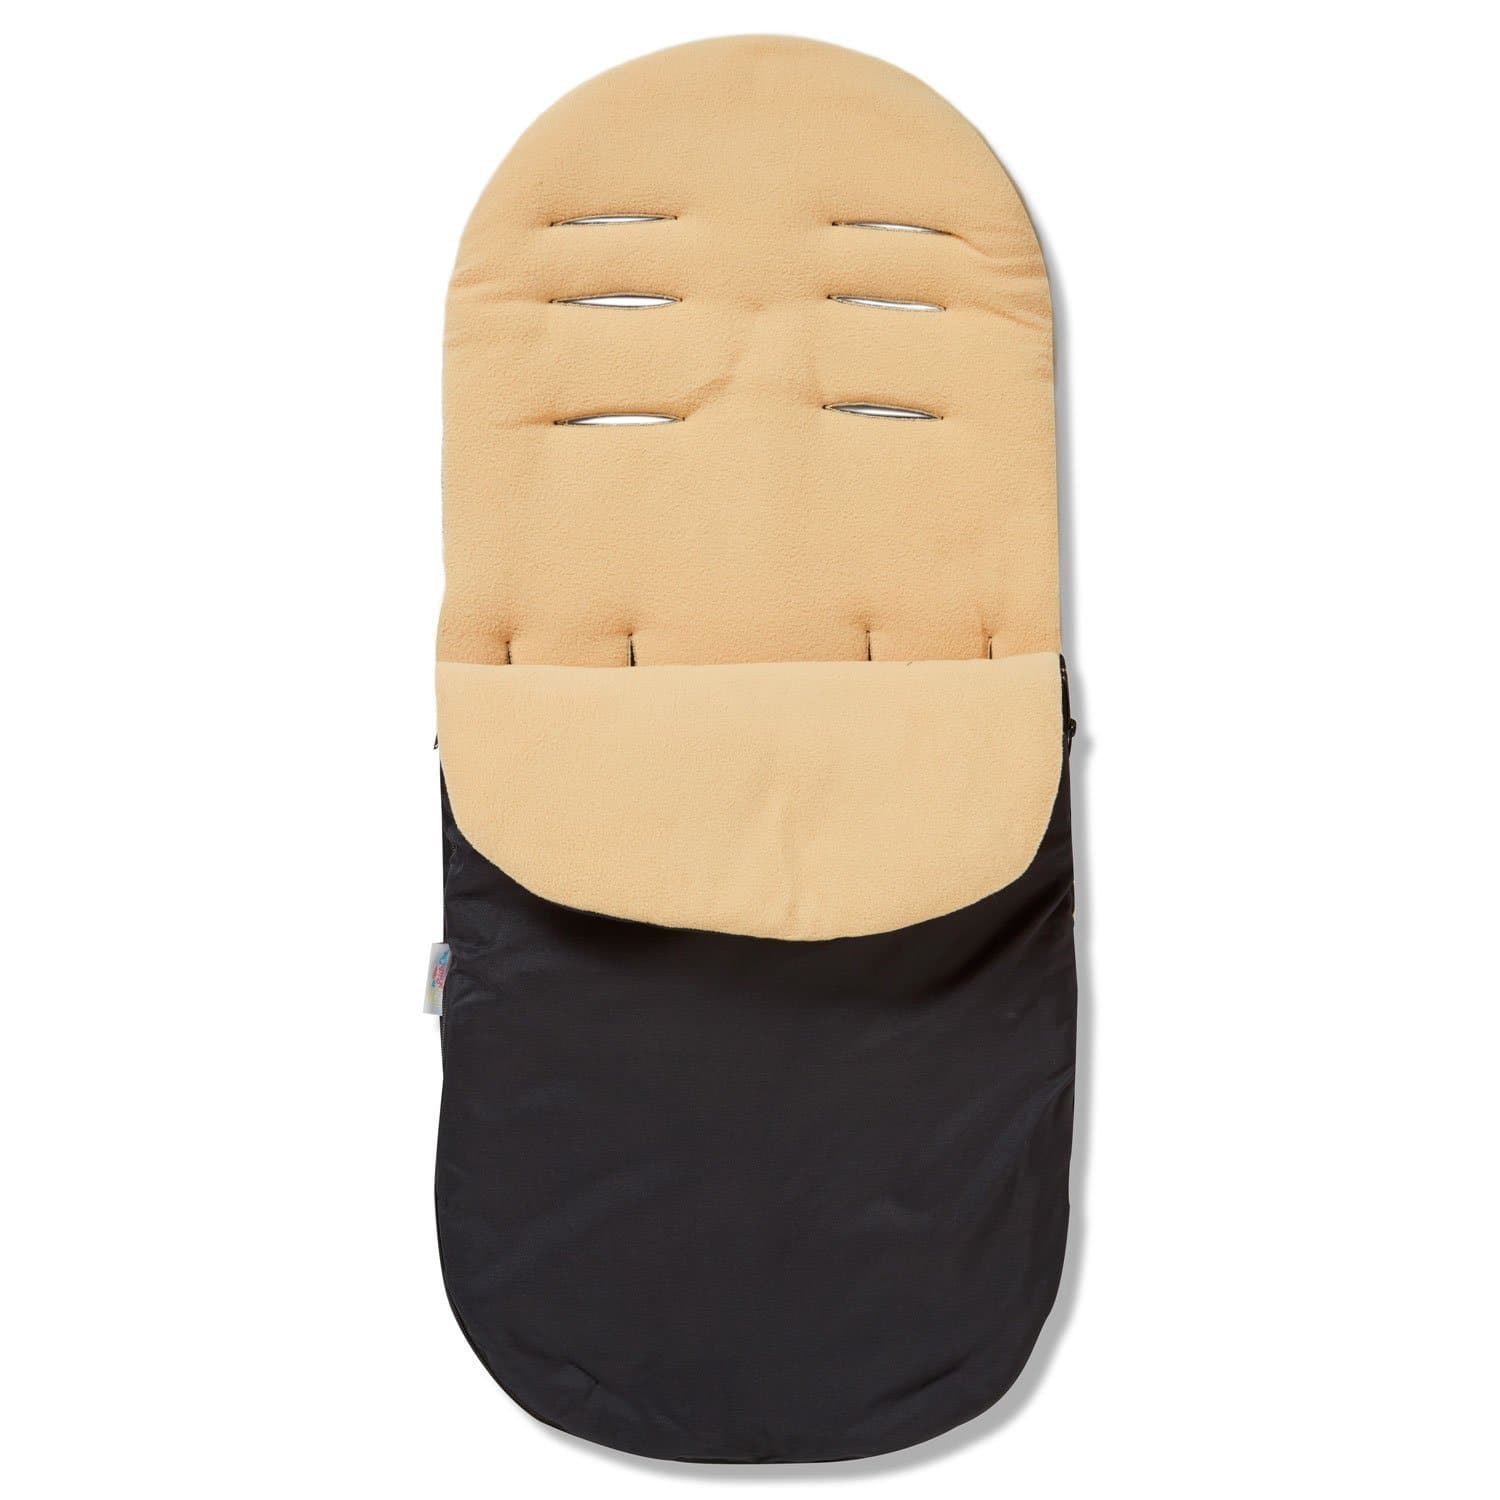 Footmuff / Cosy Toes Compatible with Quinny - Sand / Fits All Models | For Your Little One